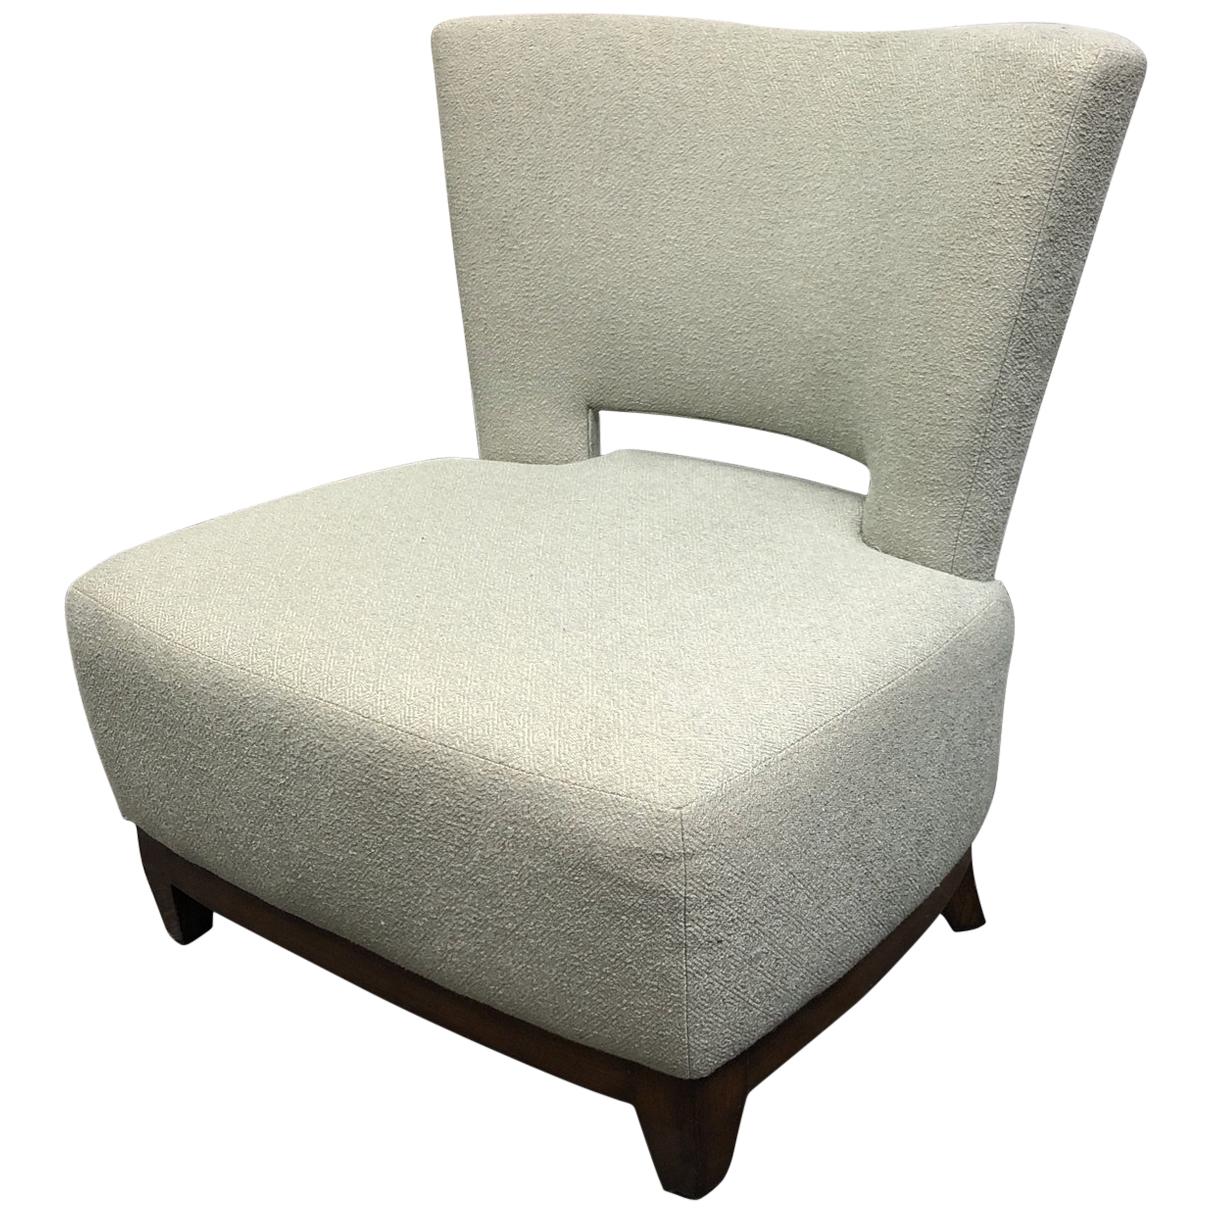 A. Rudin Upholstered Model No. 642, Armless Chair For Sale